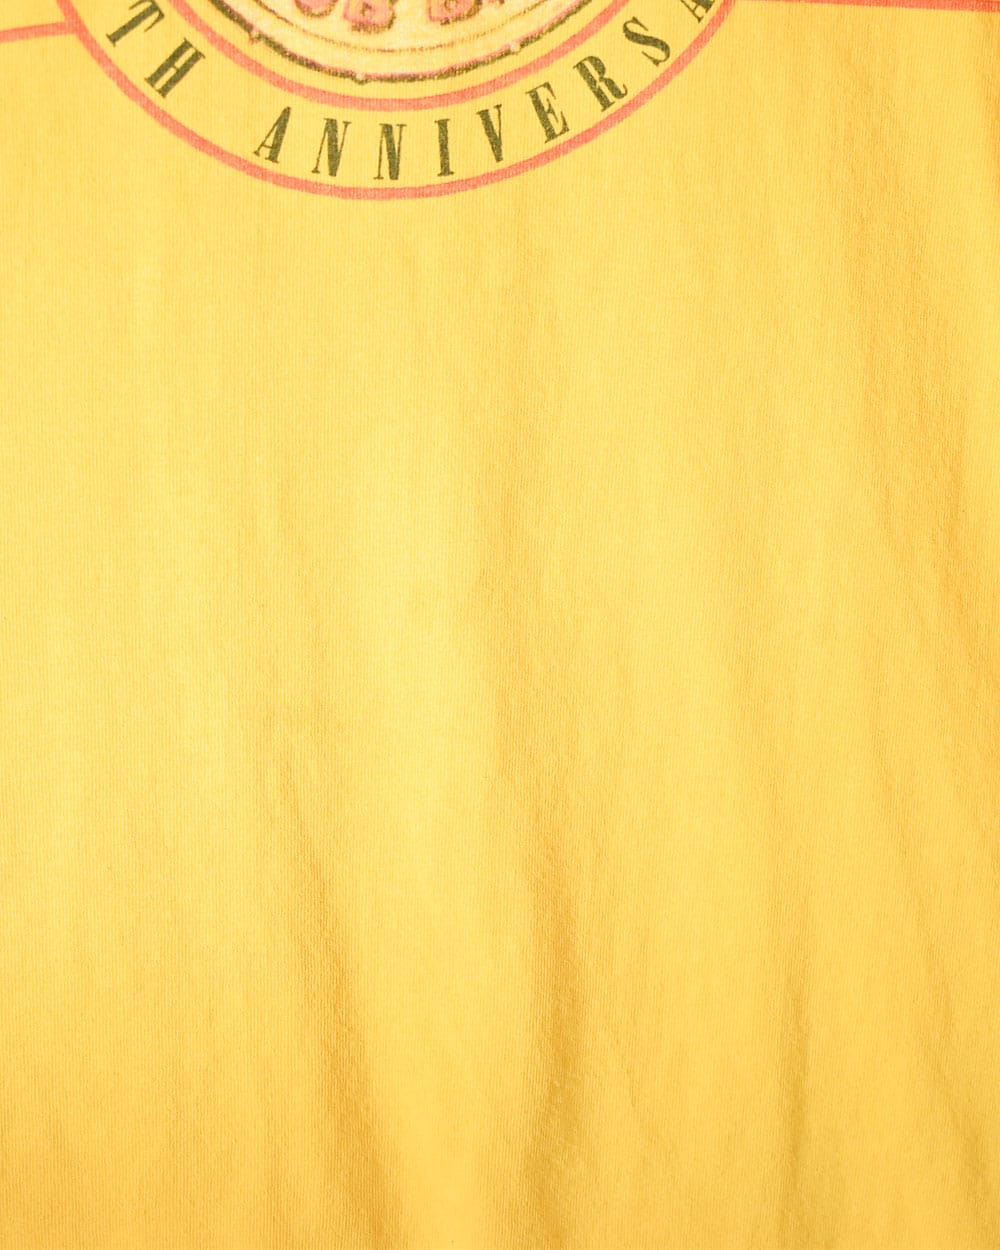 Yellow The Beatles Sgt Peppers Lonely Hearts Club Band 30th Anniversary 1997 T-Shirt - X-Large